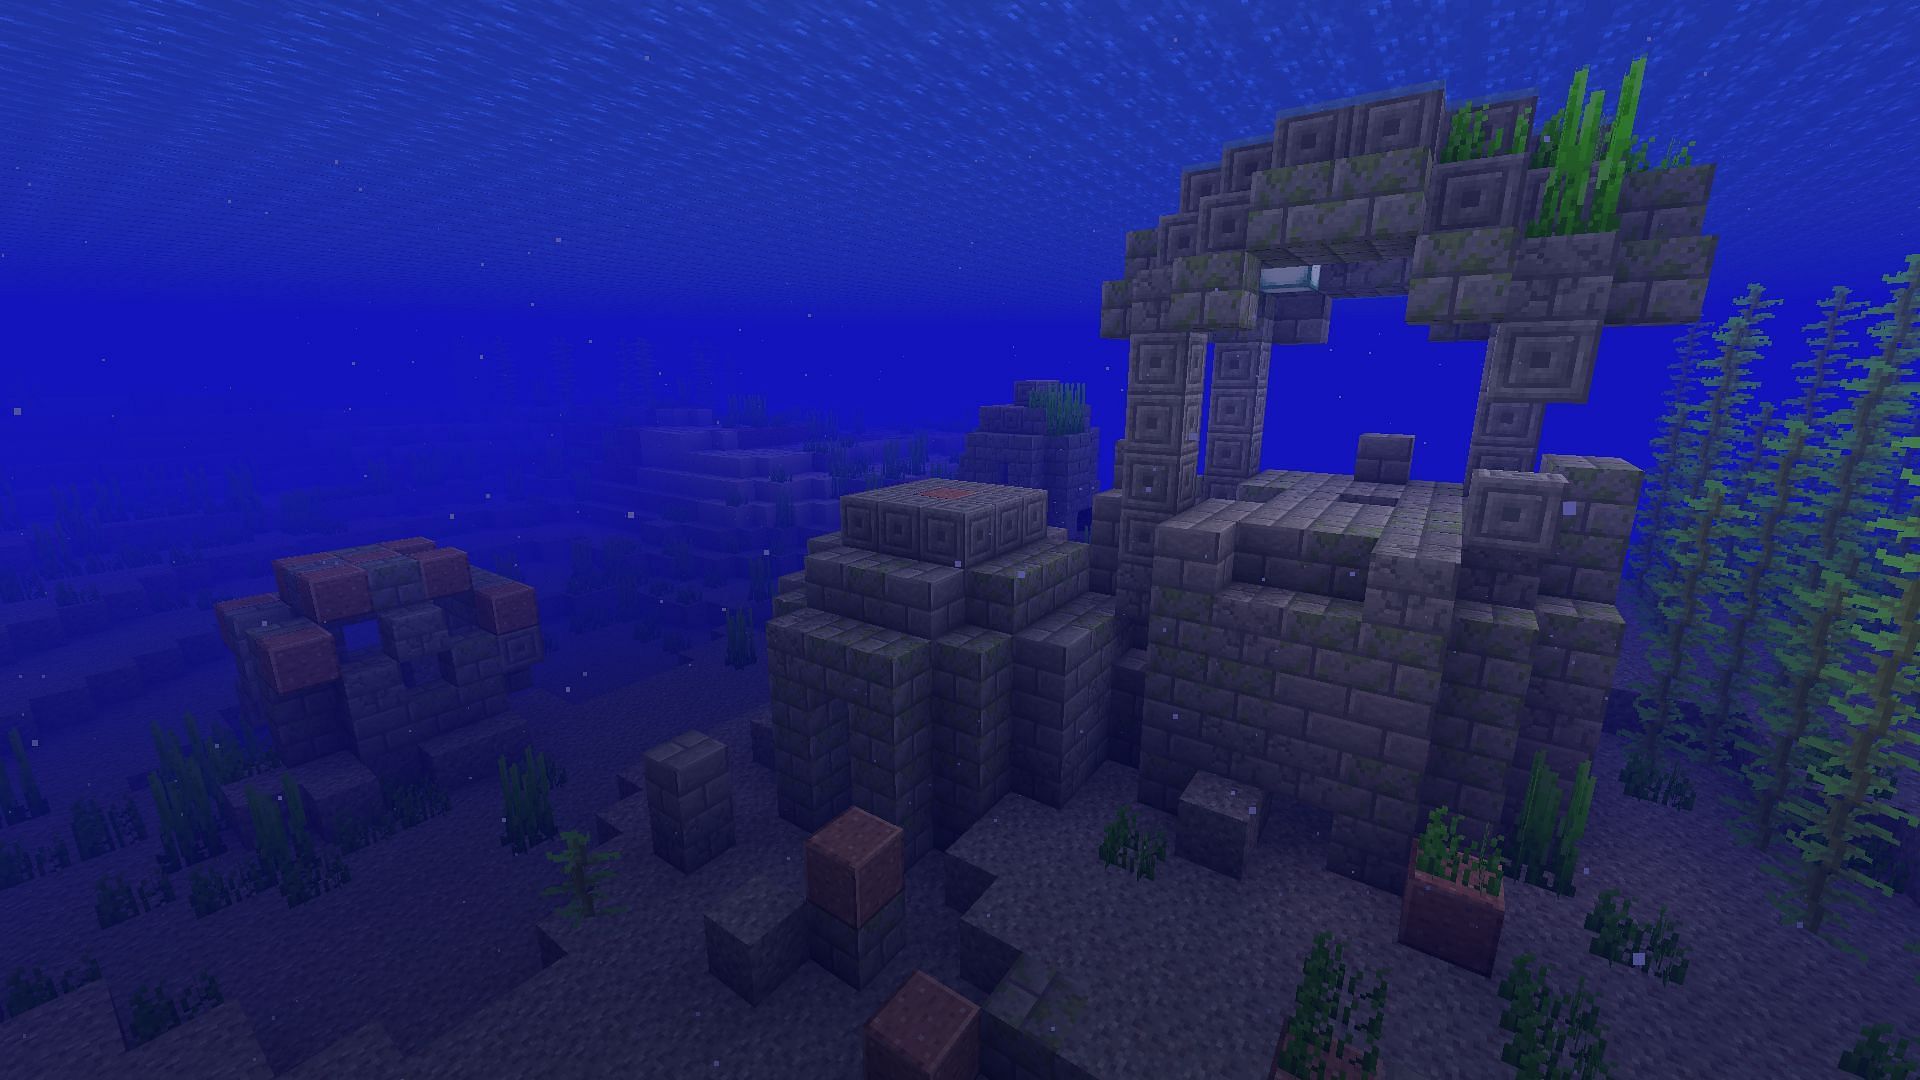 Ocean ruins will generate suspicious sand in Minecraft 1.20 Trails and Tales update that might contain sniffer eggs (Image via Mojang)